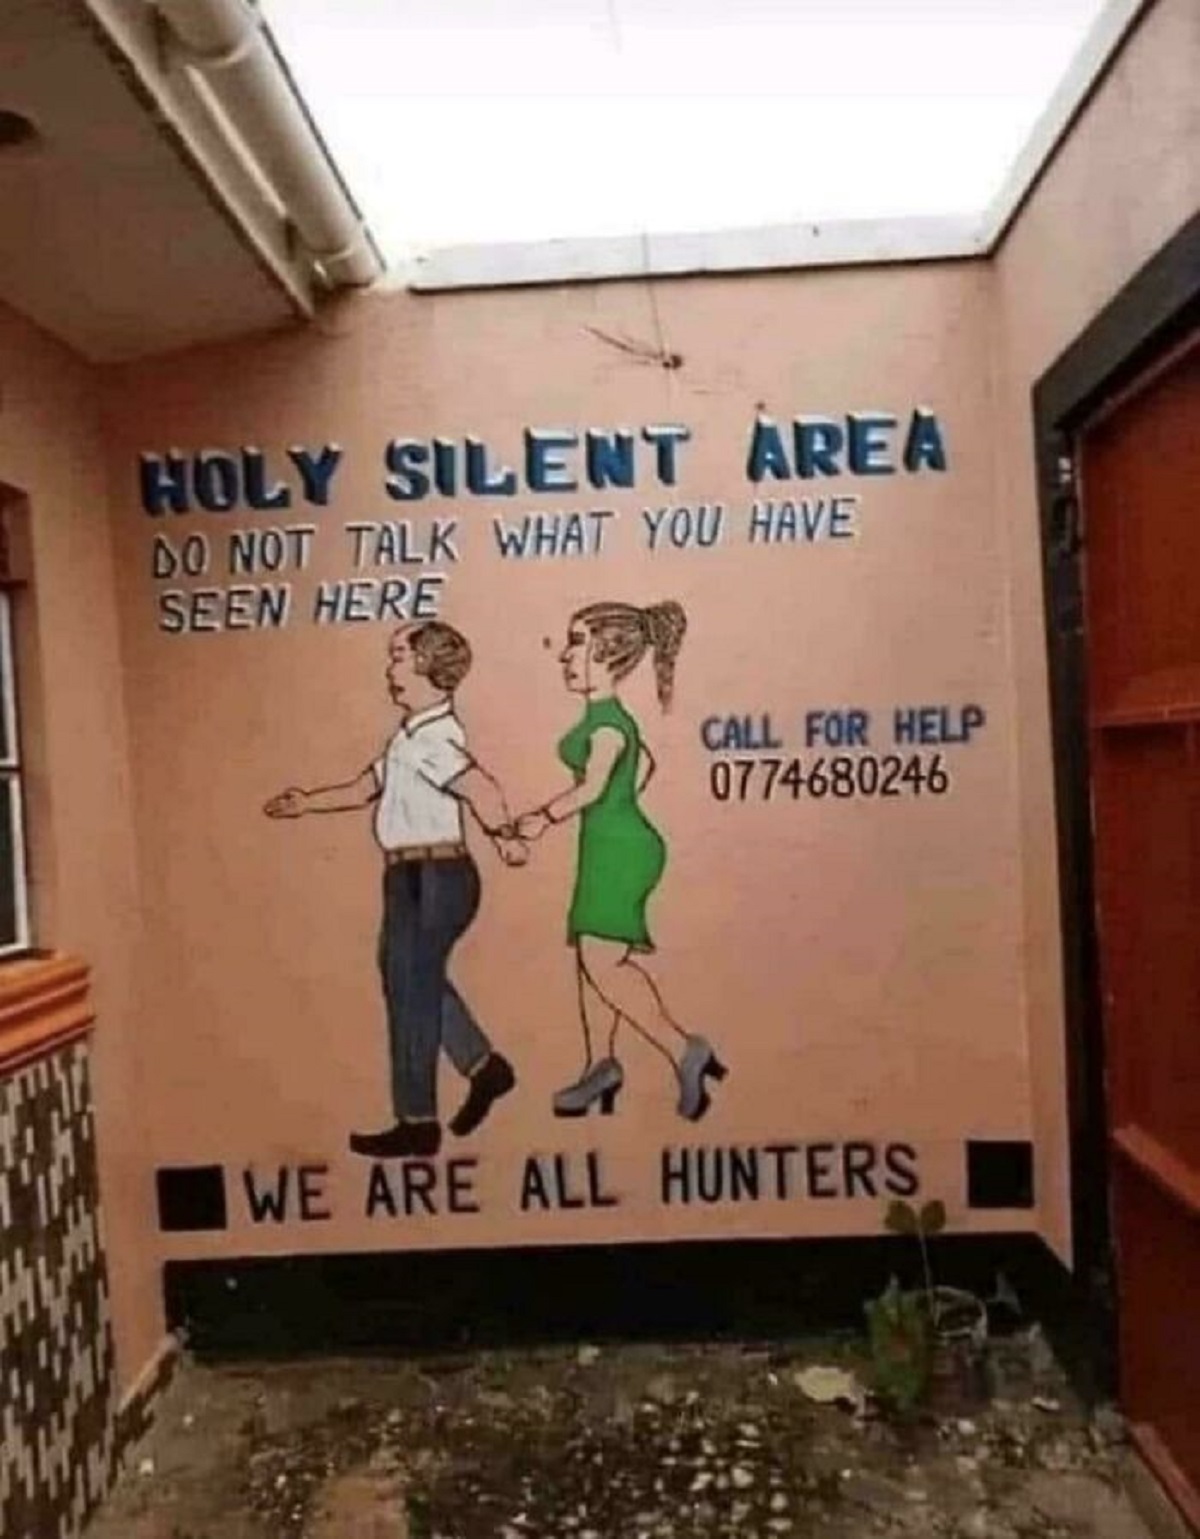 holy silent area we are all hunters - Holy Silent Area Do Not Talk What You Have Seen Here Call For Help 0774680246 We Are All Hunters